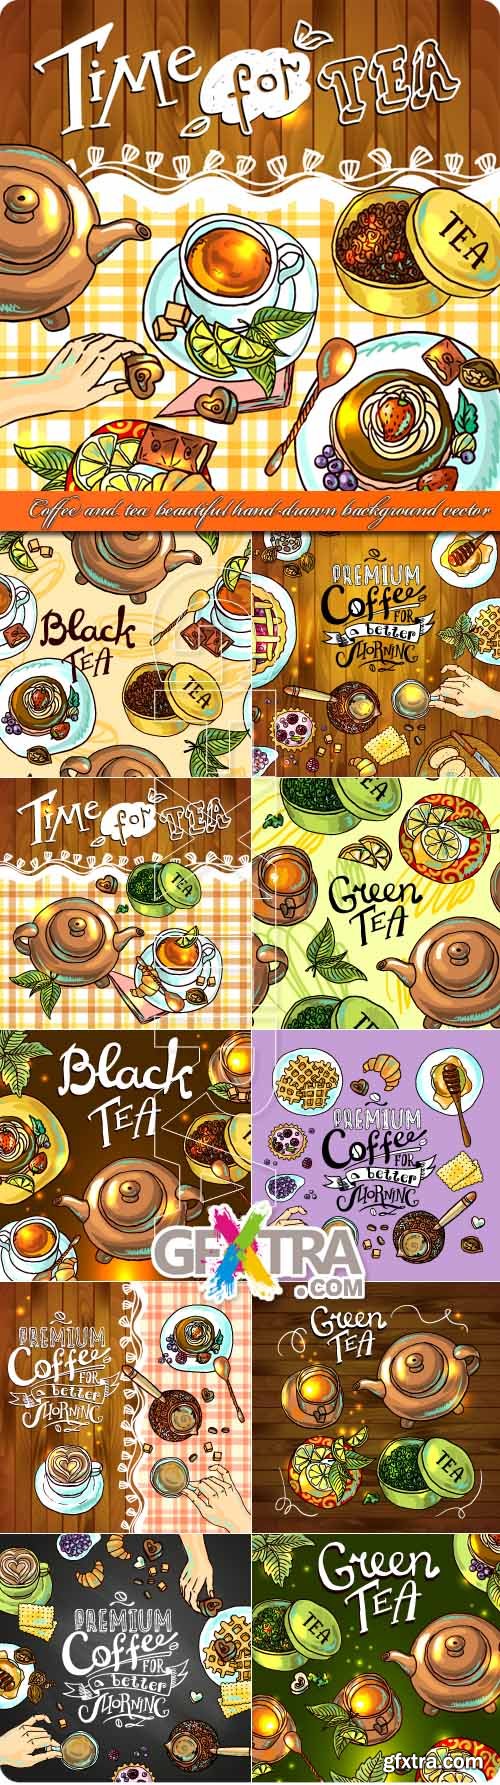 Coffee and tea beautiful hand-drawn background vector